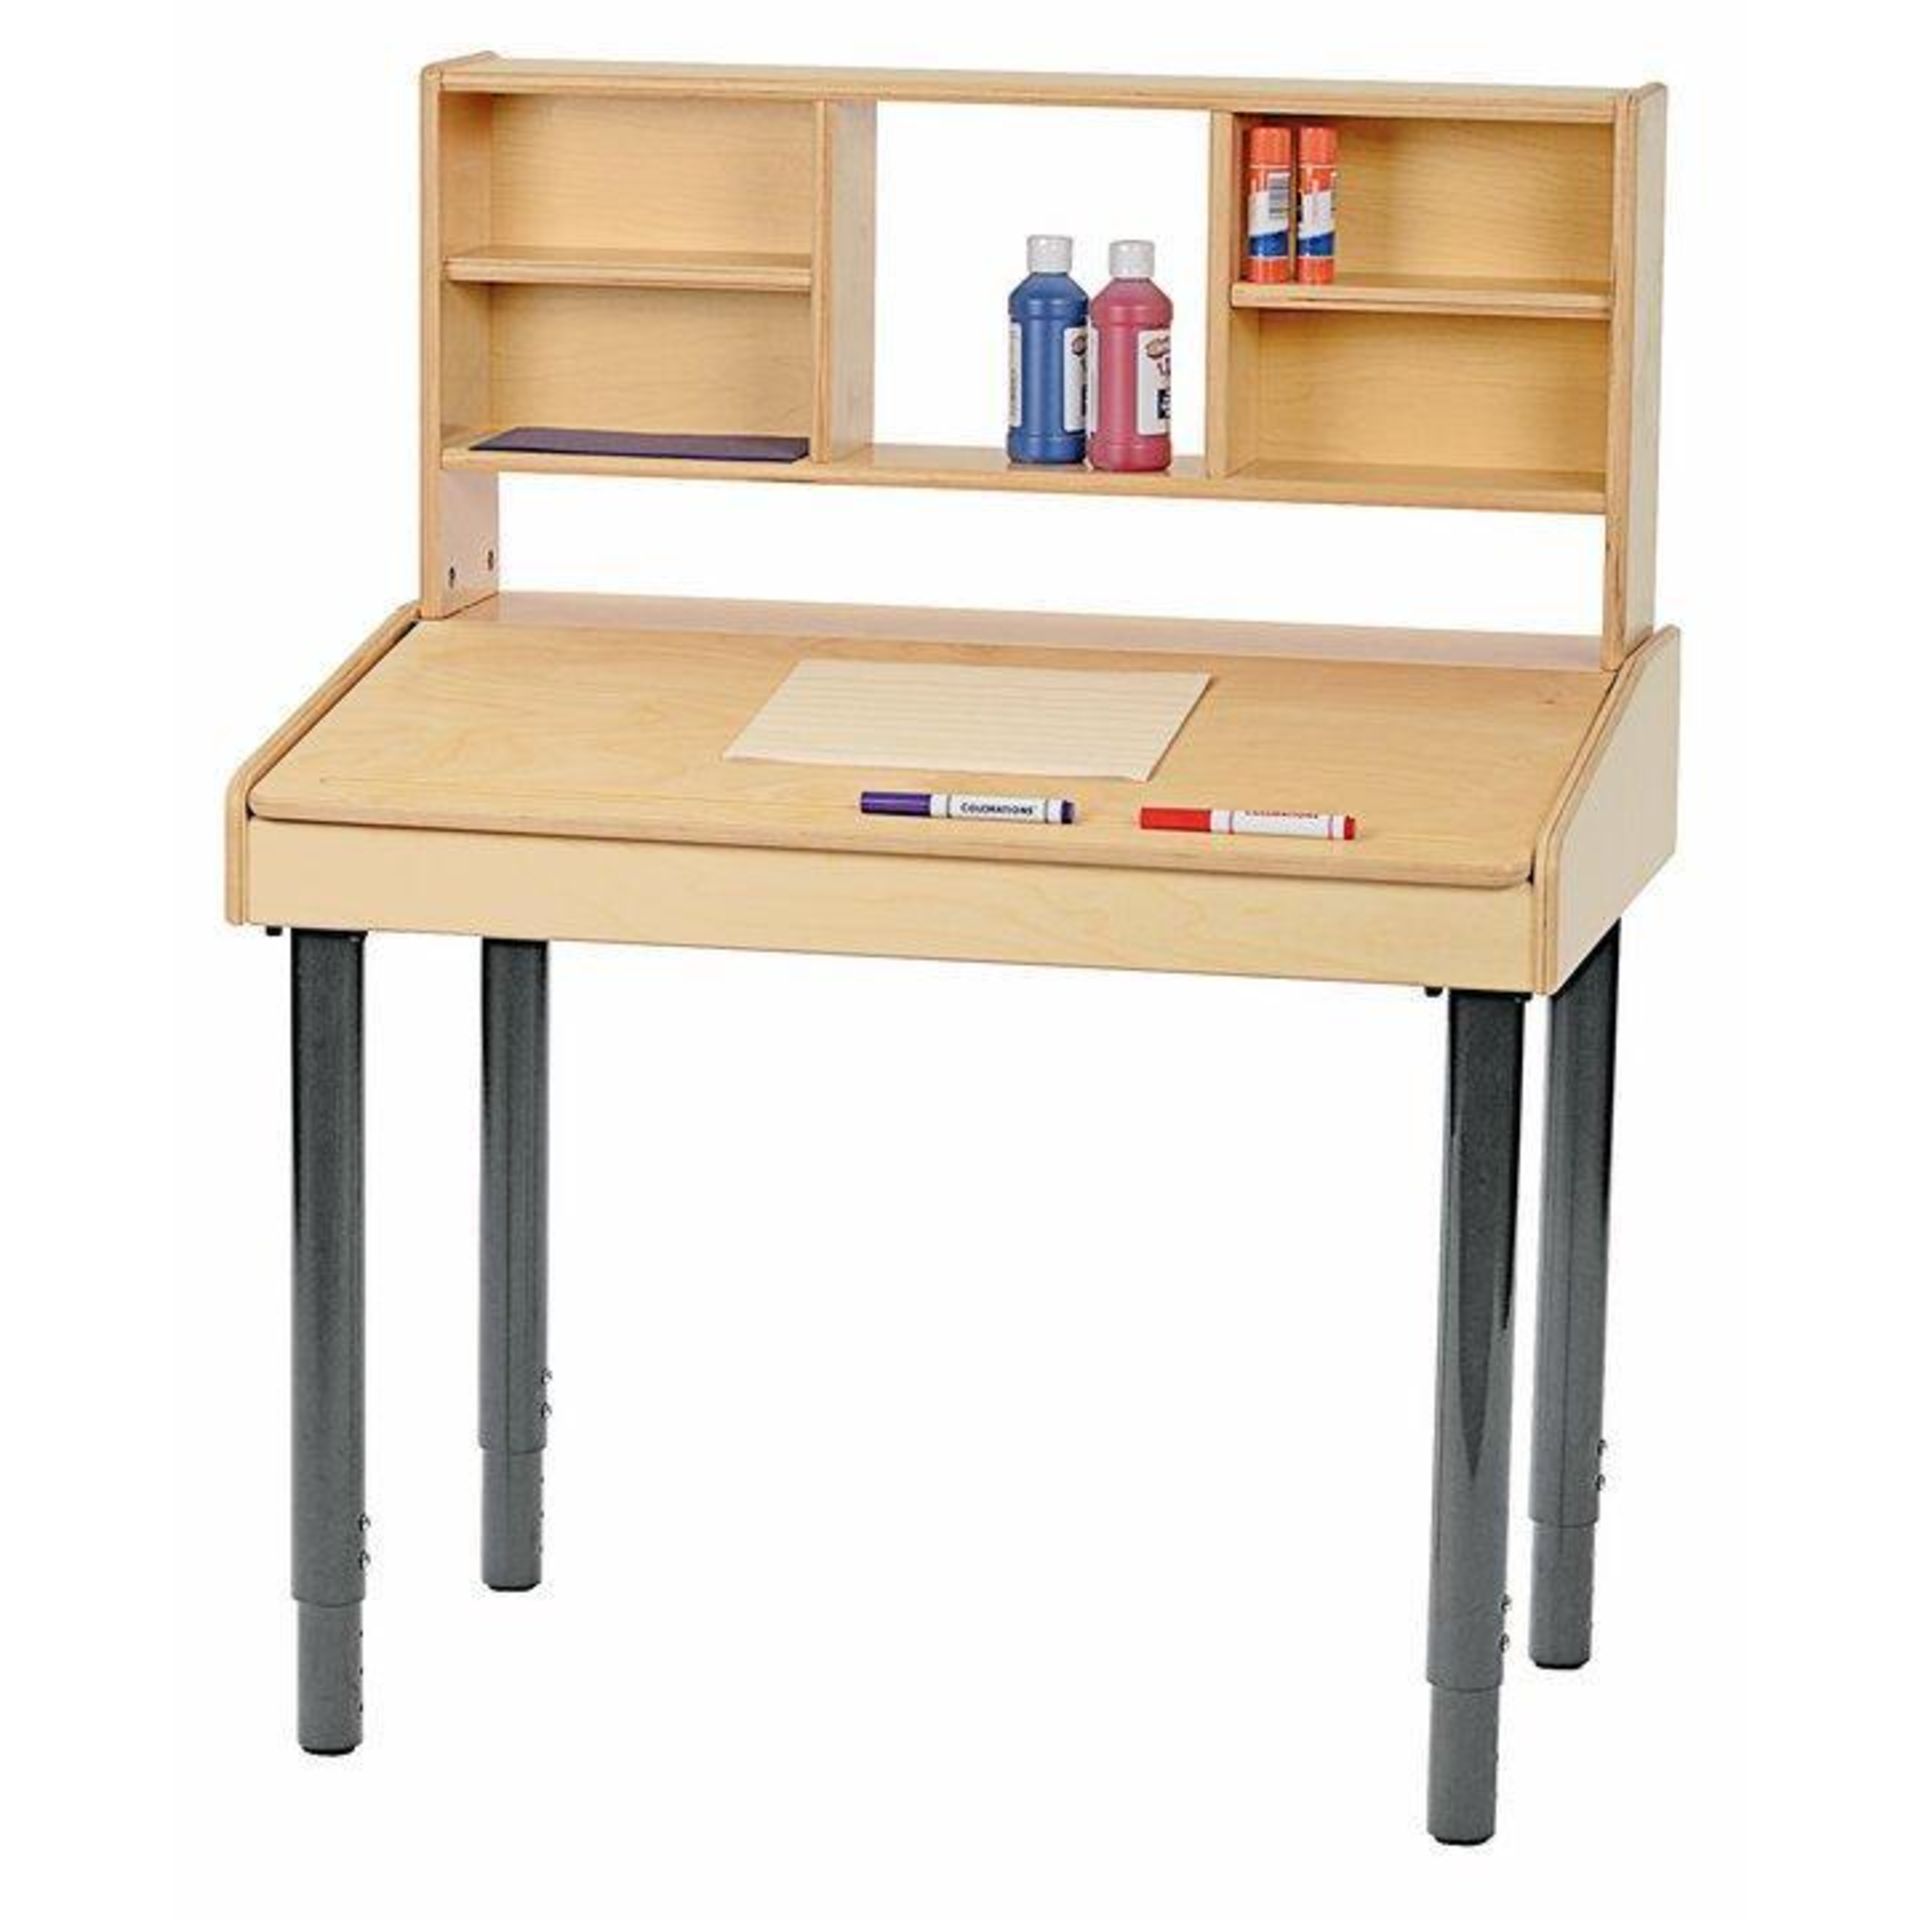 LOT: Writing Desk Box 1, VL Shelf Unit 36" and Reading Cube, Model Numbers MPC3019-1, ANG9150-1 and - Image 2 of 6